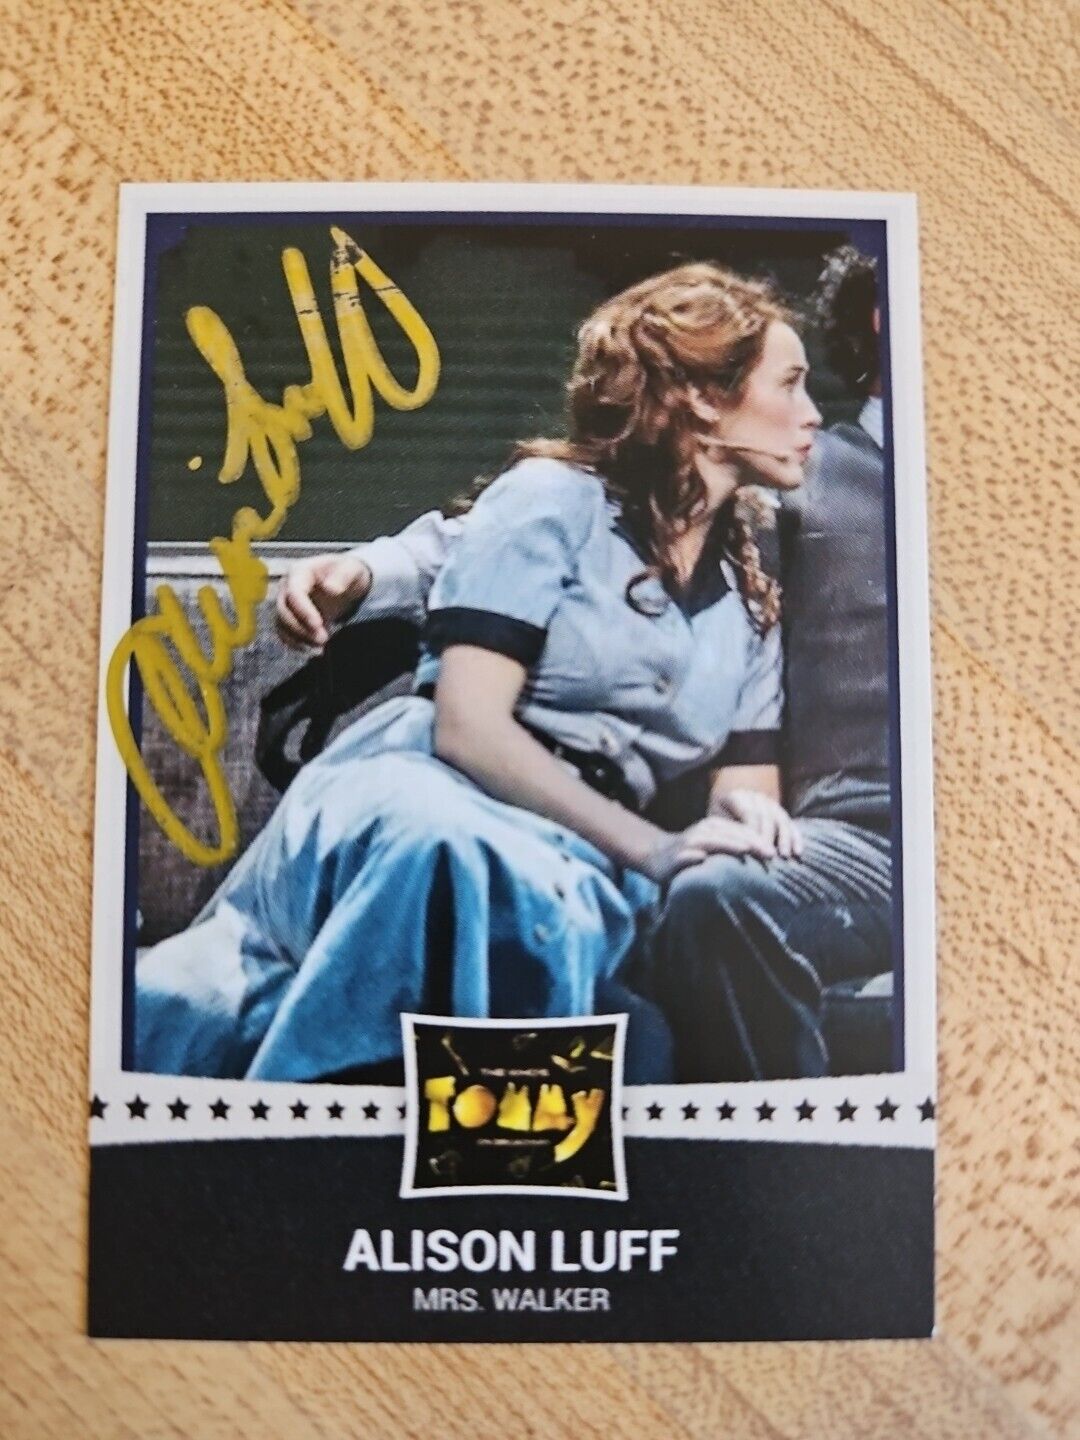 Alison Luff Custom Signed Card - Mrs. Walker In Tommy The Musical On Broadway